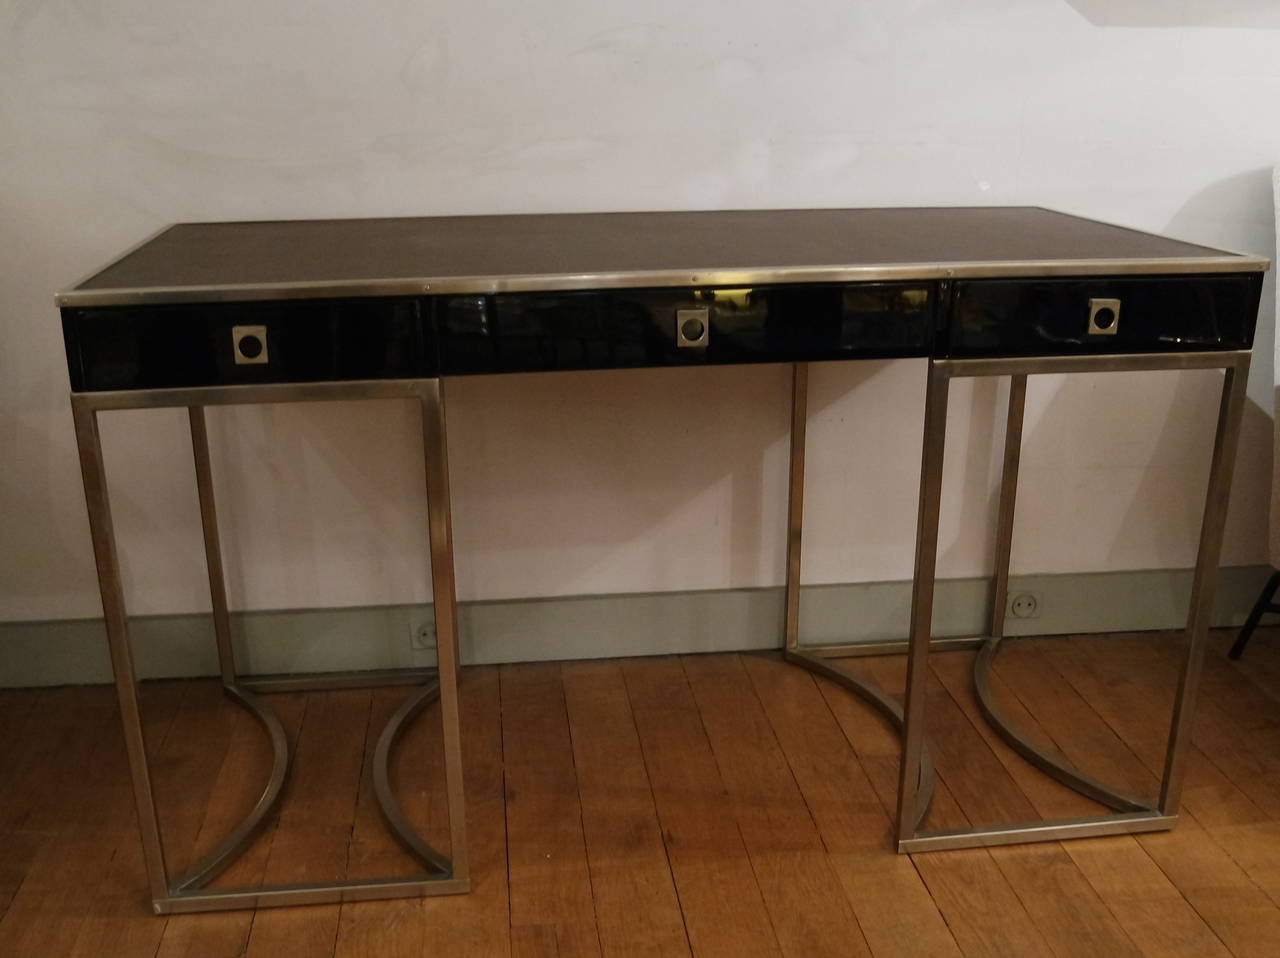 Good size desk in black lacquered mahogany with brass feet and details, very rare form of the legs, dark brown moleskin top